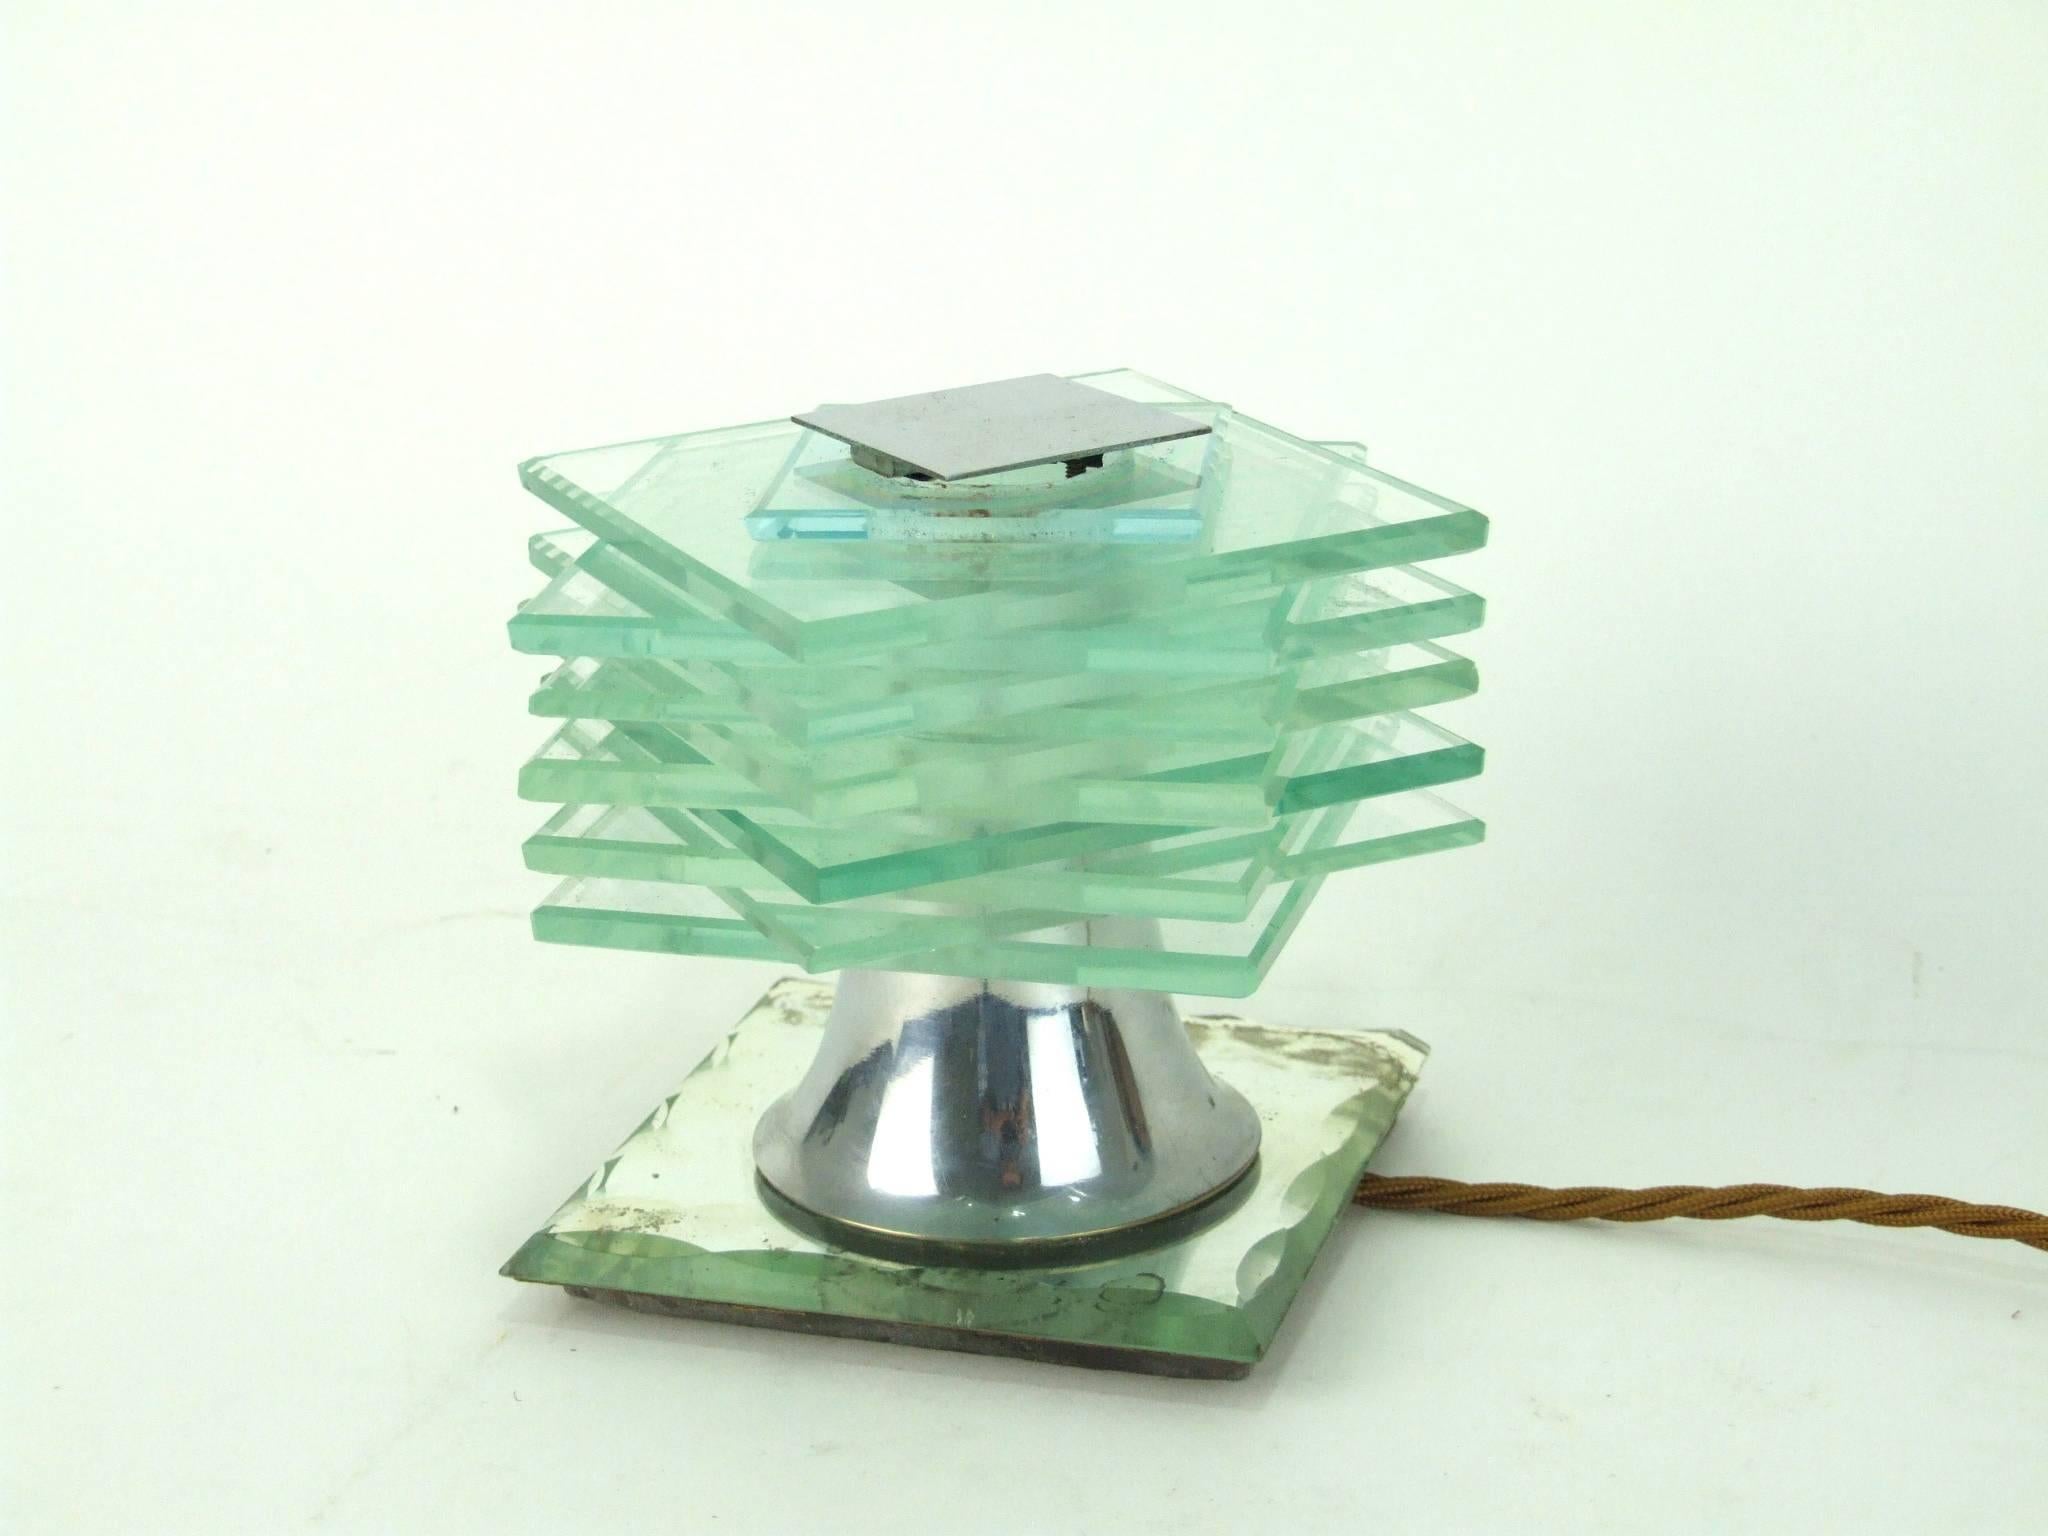 French Art Deco modernist stacked glass table lamp by Desny. It measures 4.5 inches high by 5.5 inches square (11.5cm x 14cm). Condition is good with no chips to the edges of the glass points but there is some foxing and loss of silvering to the